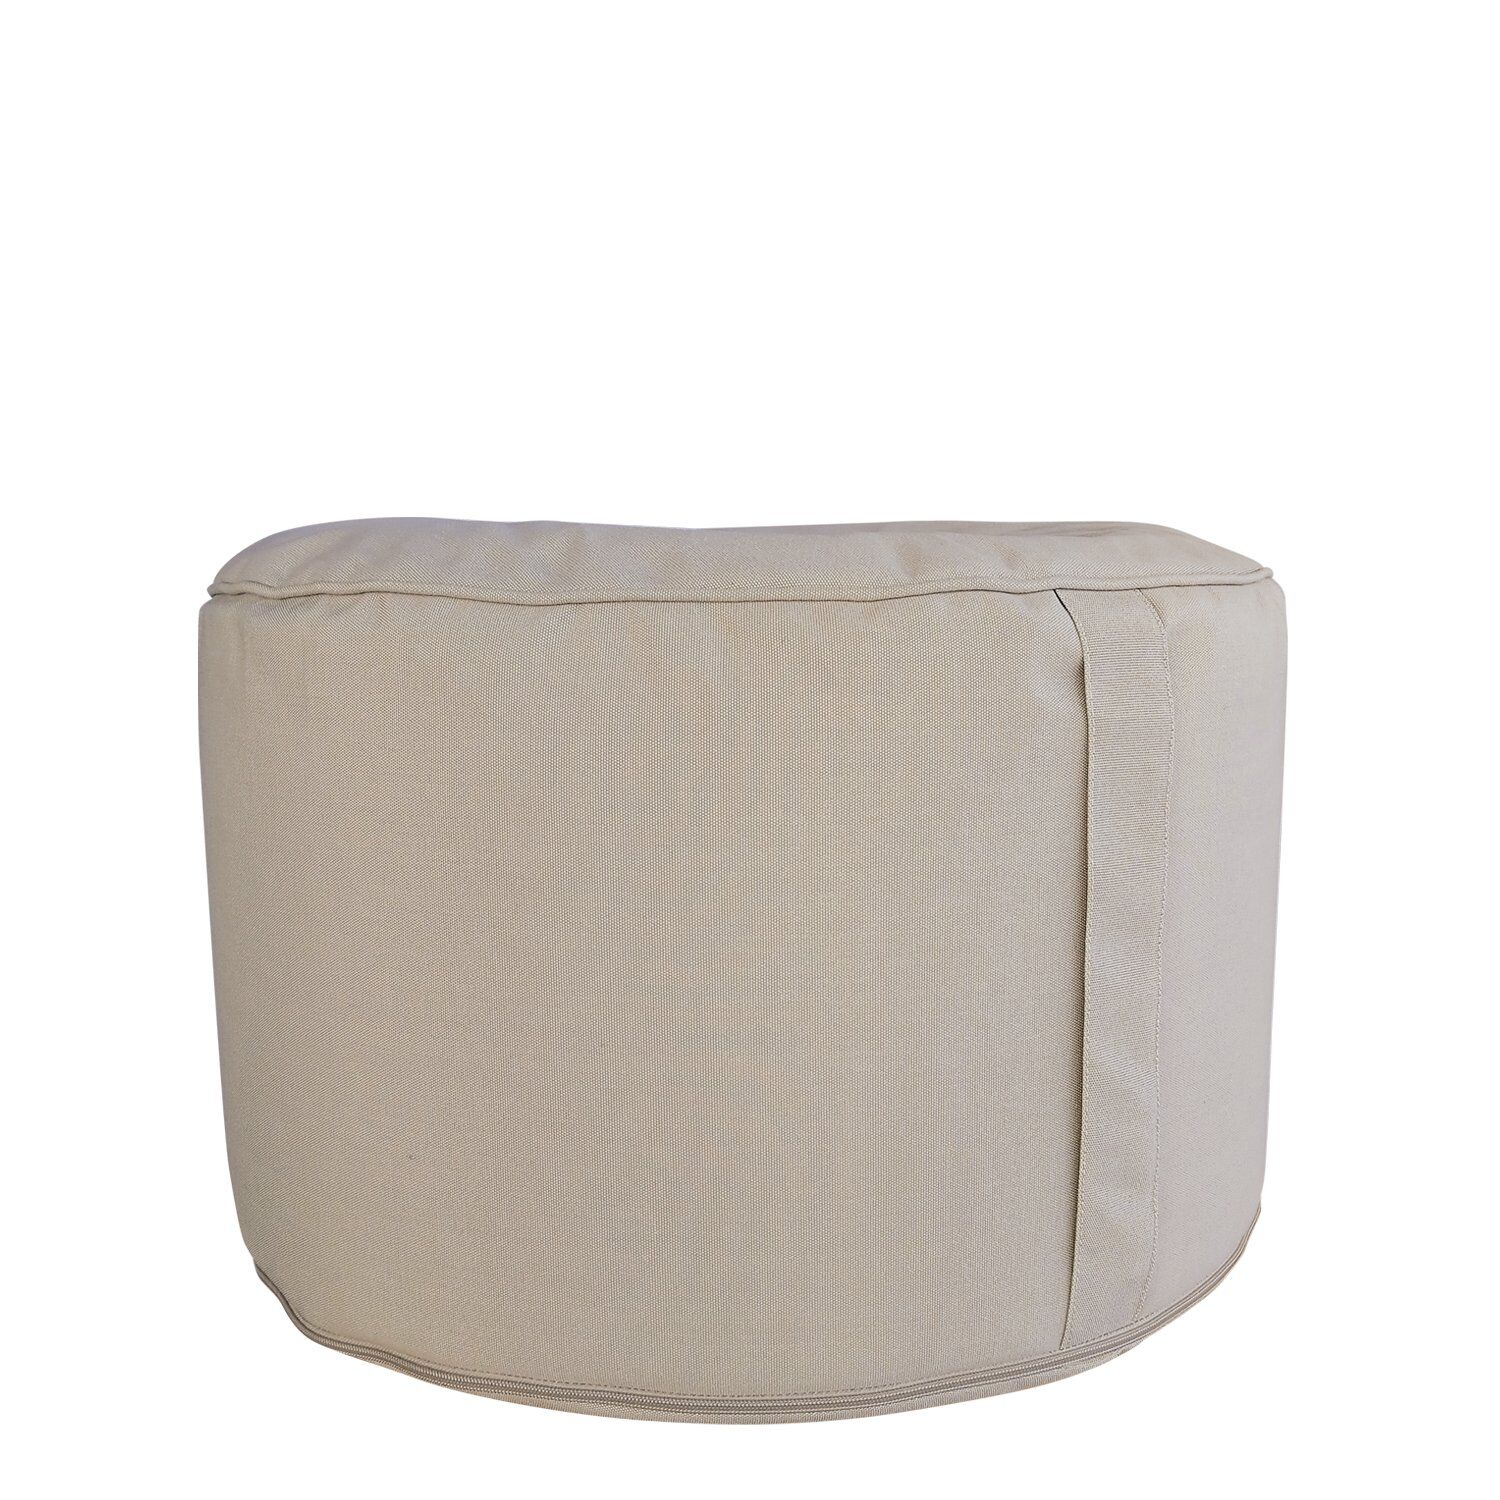 ORIANE Pouf 100% Waterproof With UV Protection Removable Cover Beige Fabric 60x60x34cm